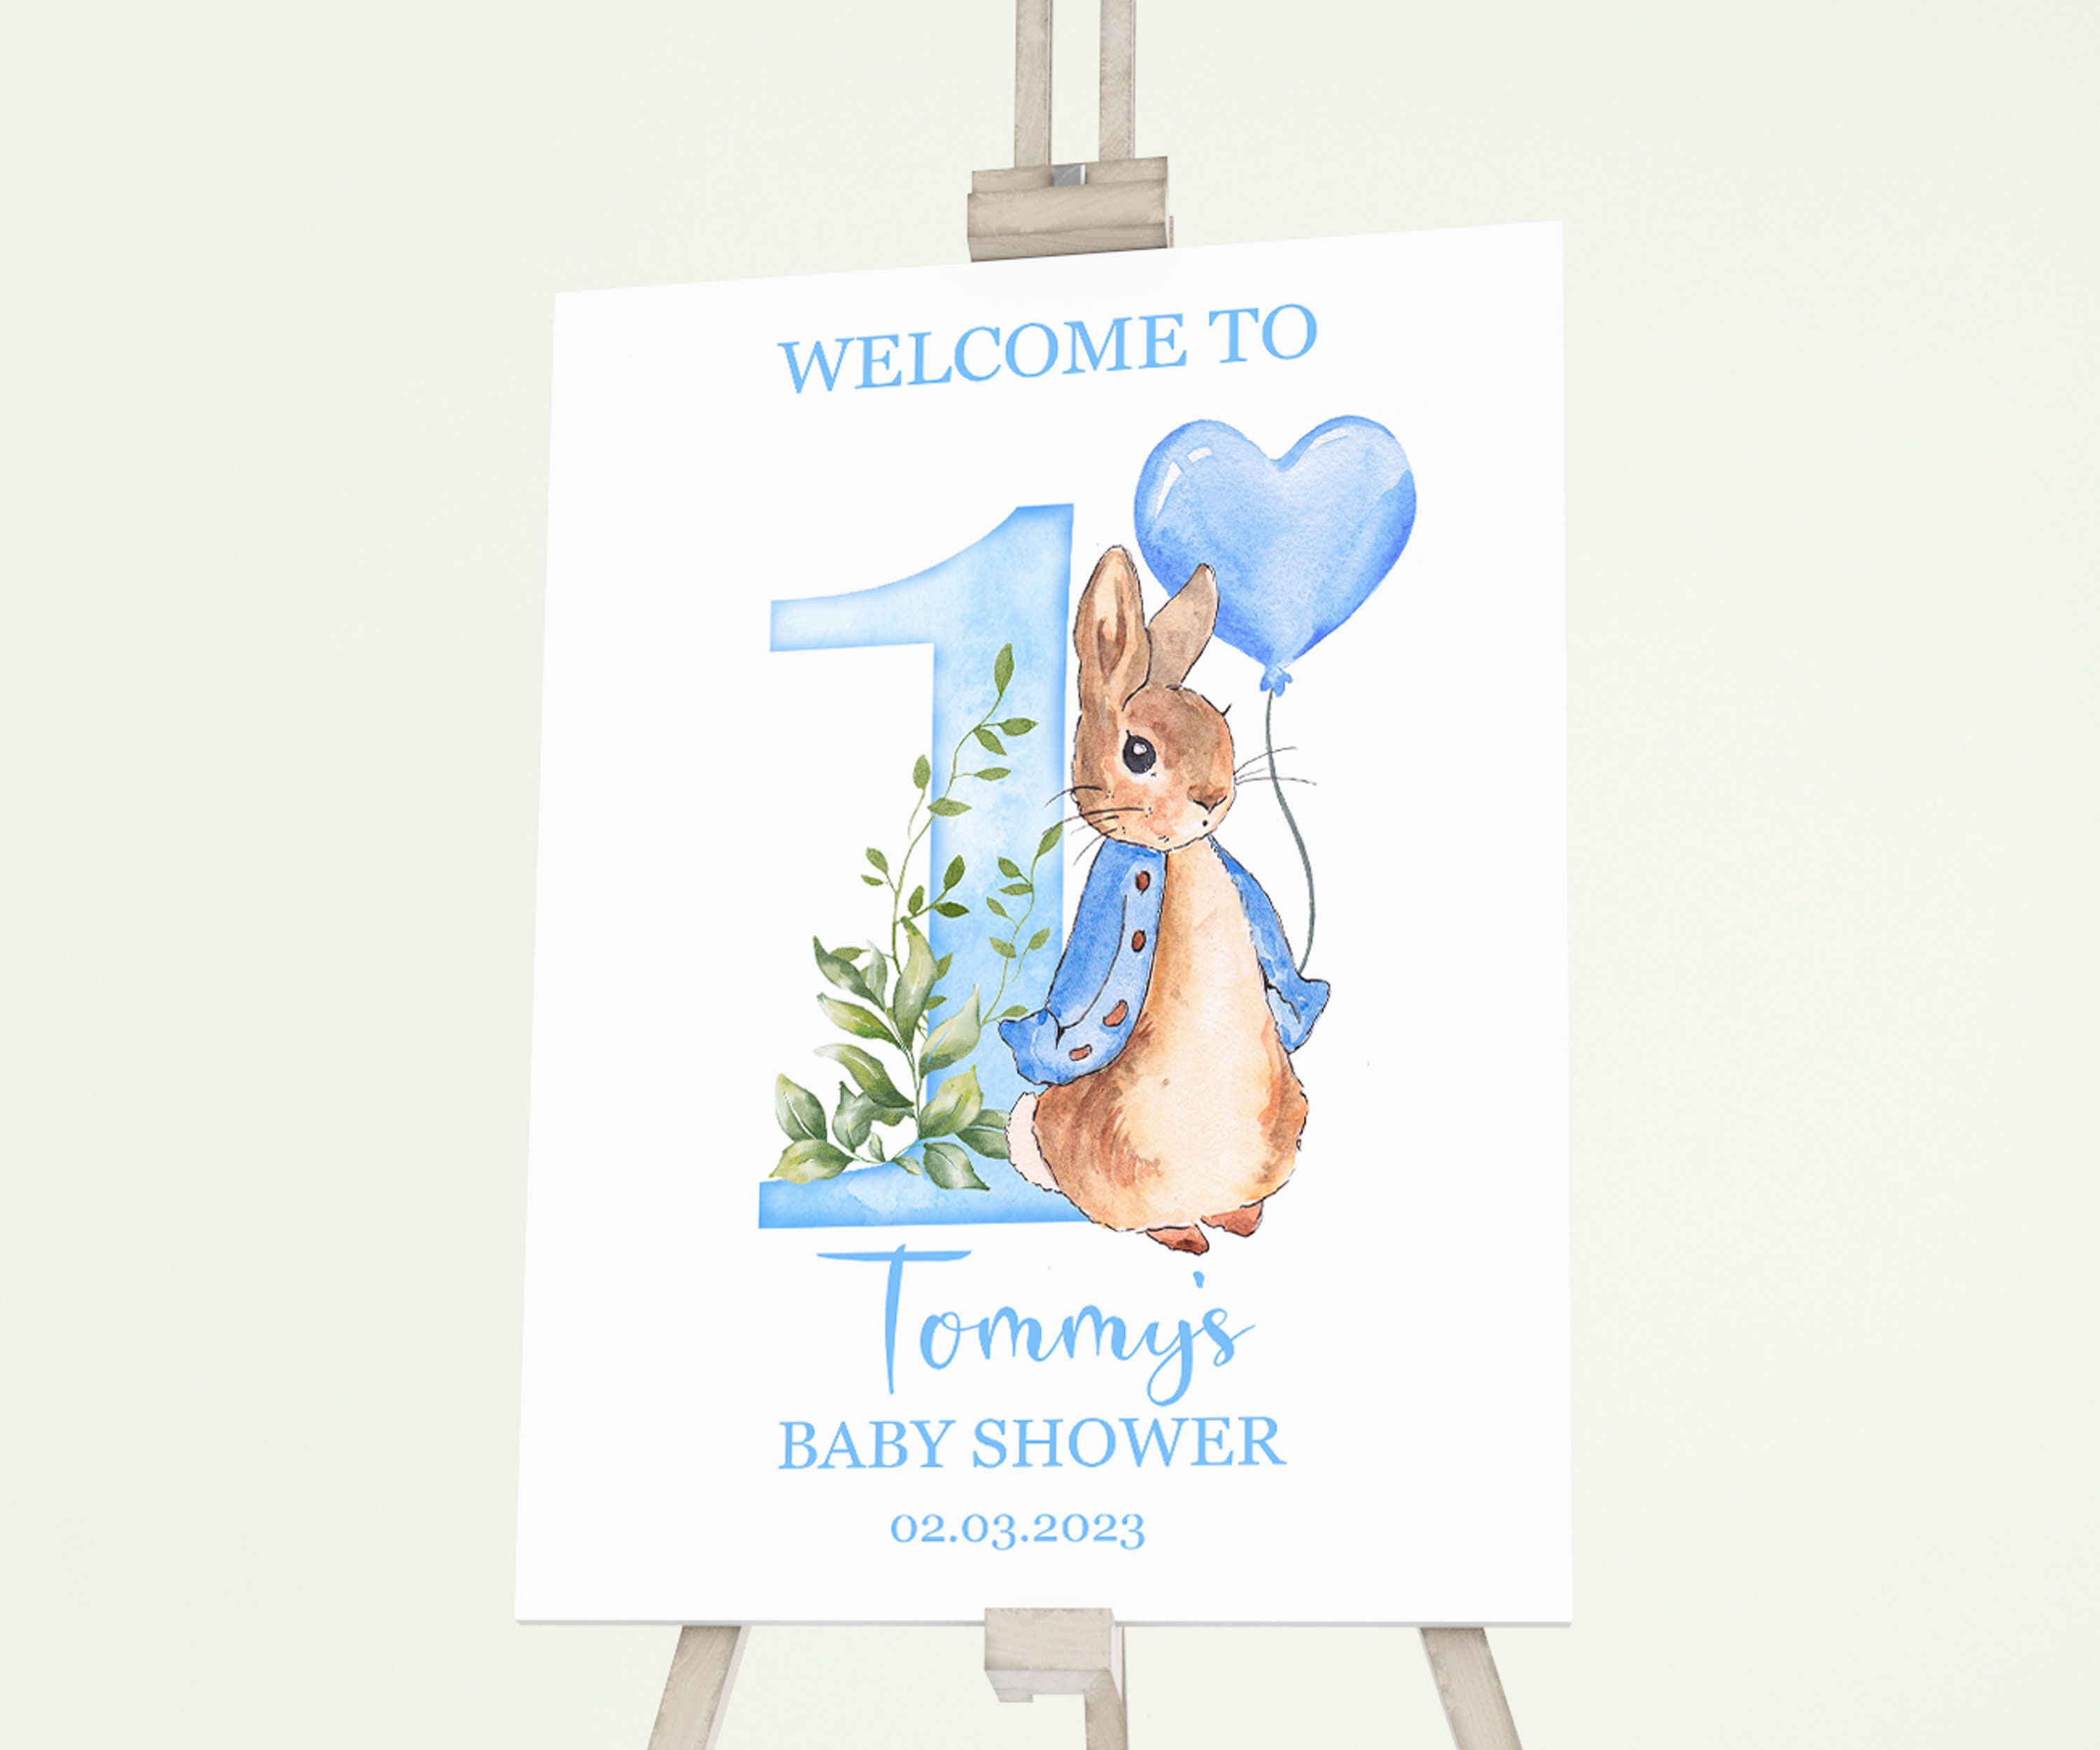 FREE Printable) – Watercolor Peter The Rabbit Baby Shower